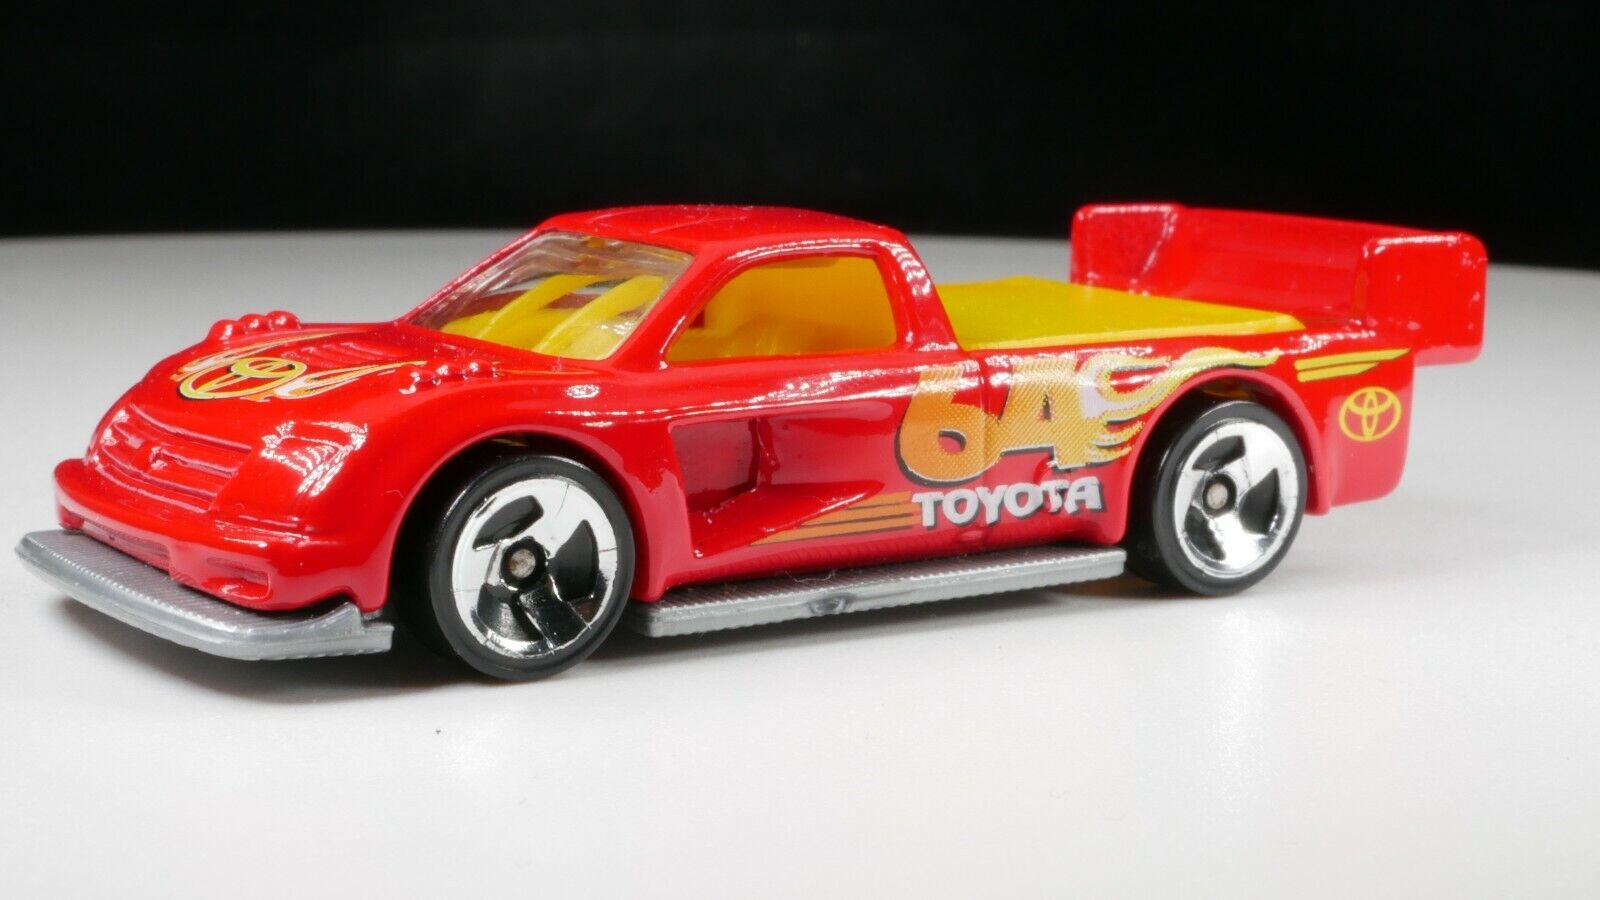 '00 HOT WHEELS PIKES PEAK TOYOTA TACOMA 1:64 SCALE RACING SPOILER RED 3SP